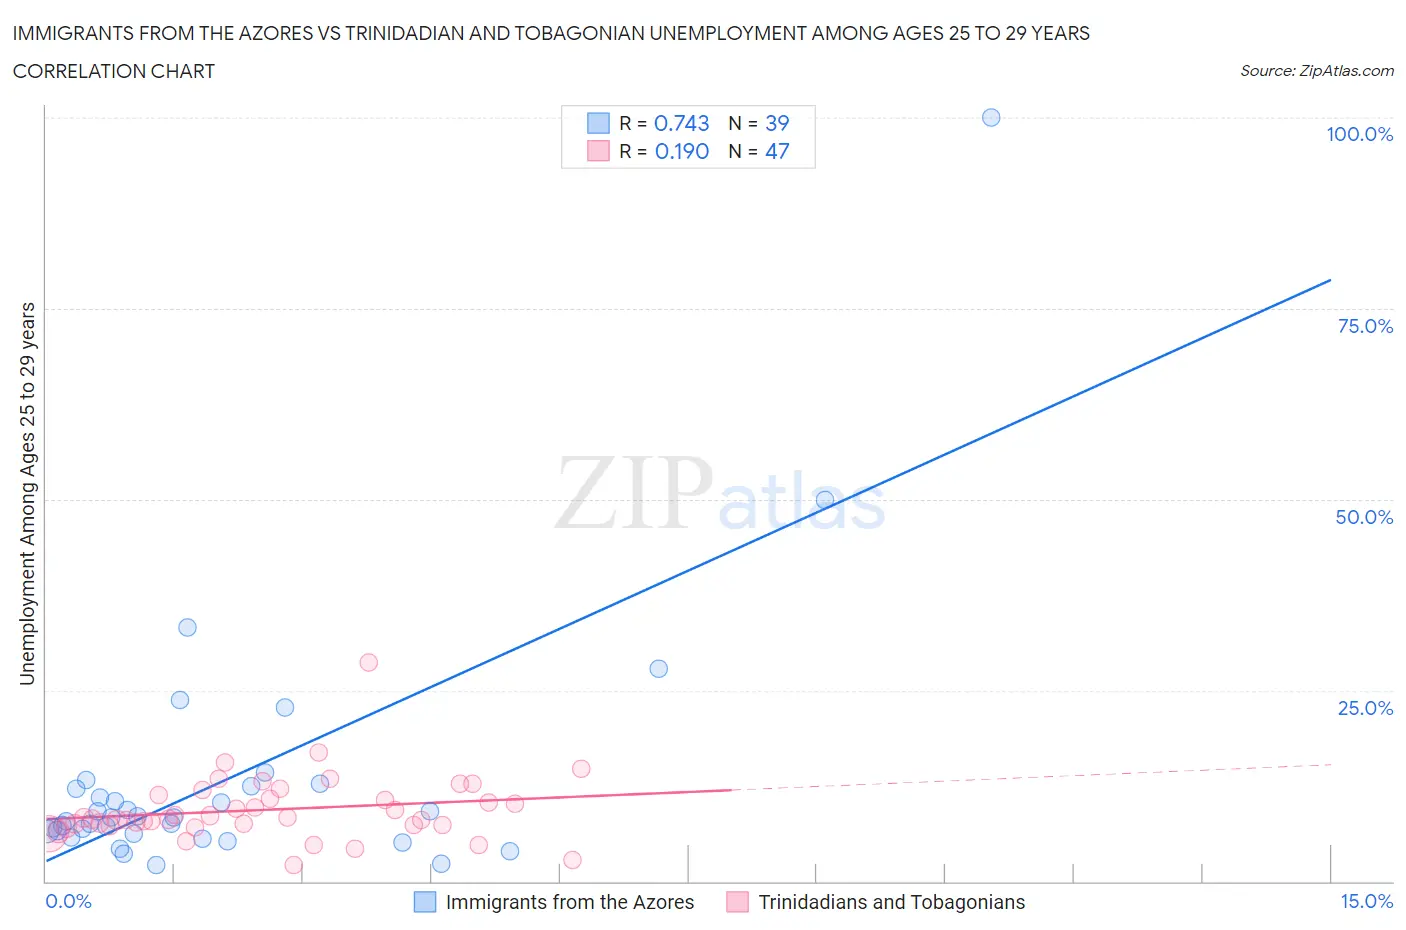 Immigrants from the Azores vs Trinidadian and Tobagonian Unemployment Among Ages 25 to 29 years